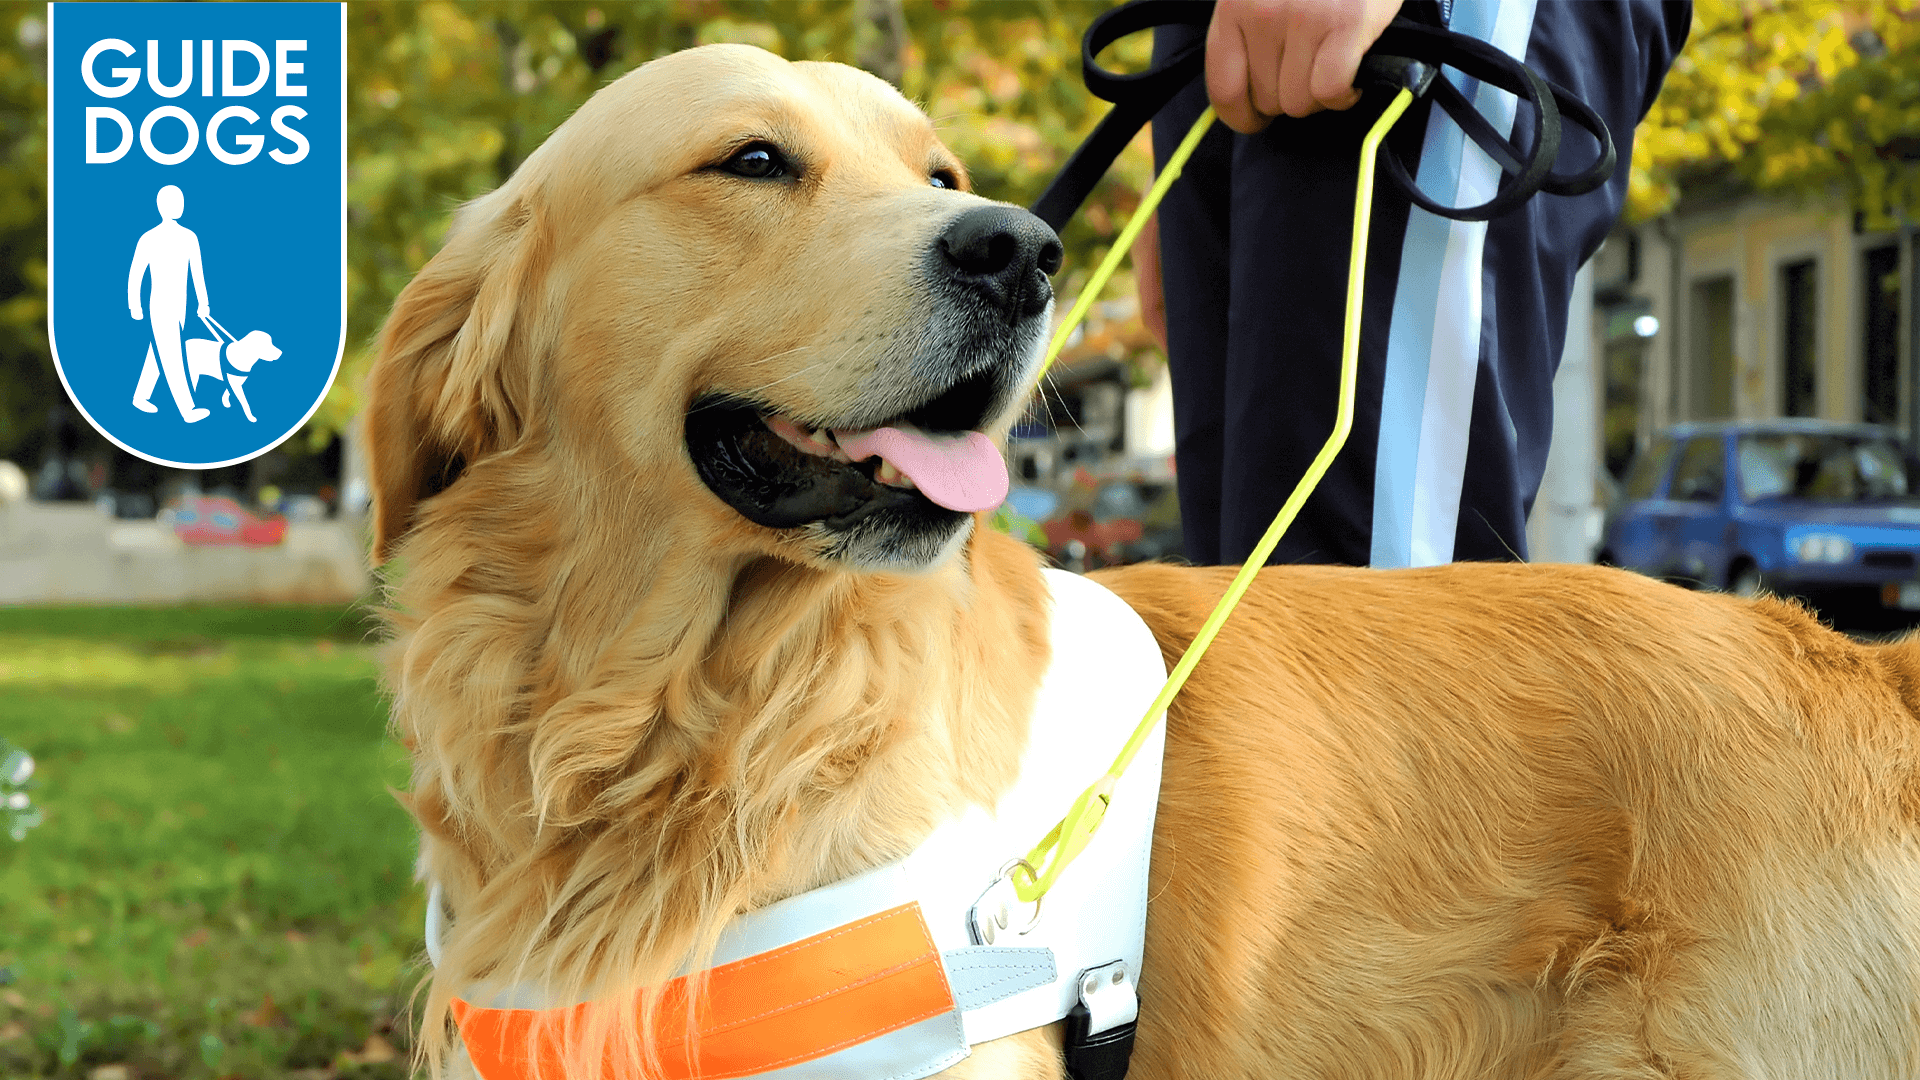 Guide Dogs Charity